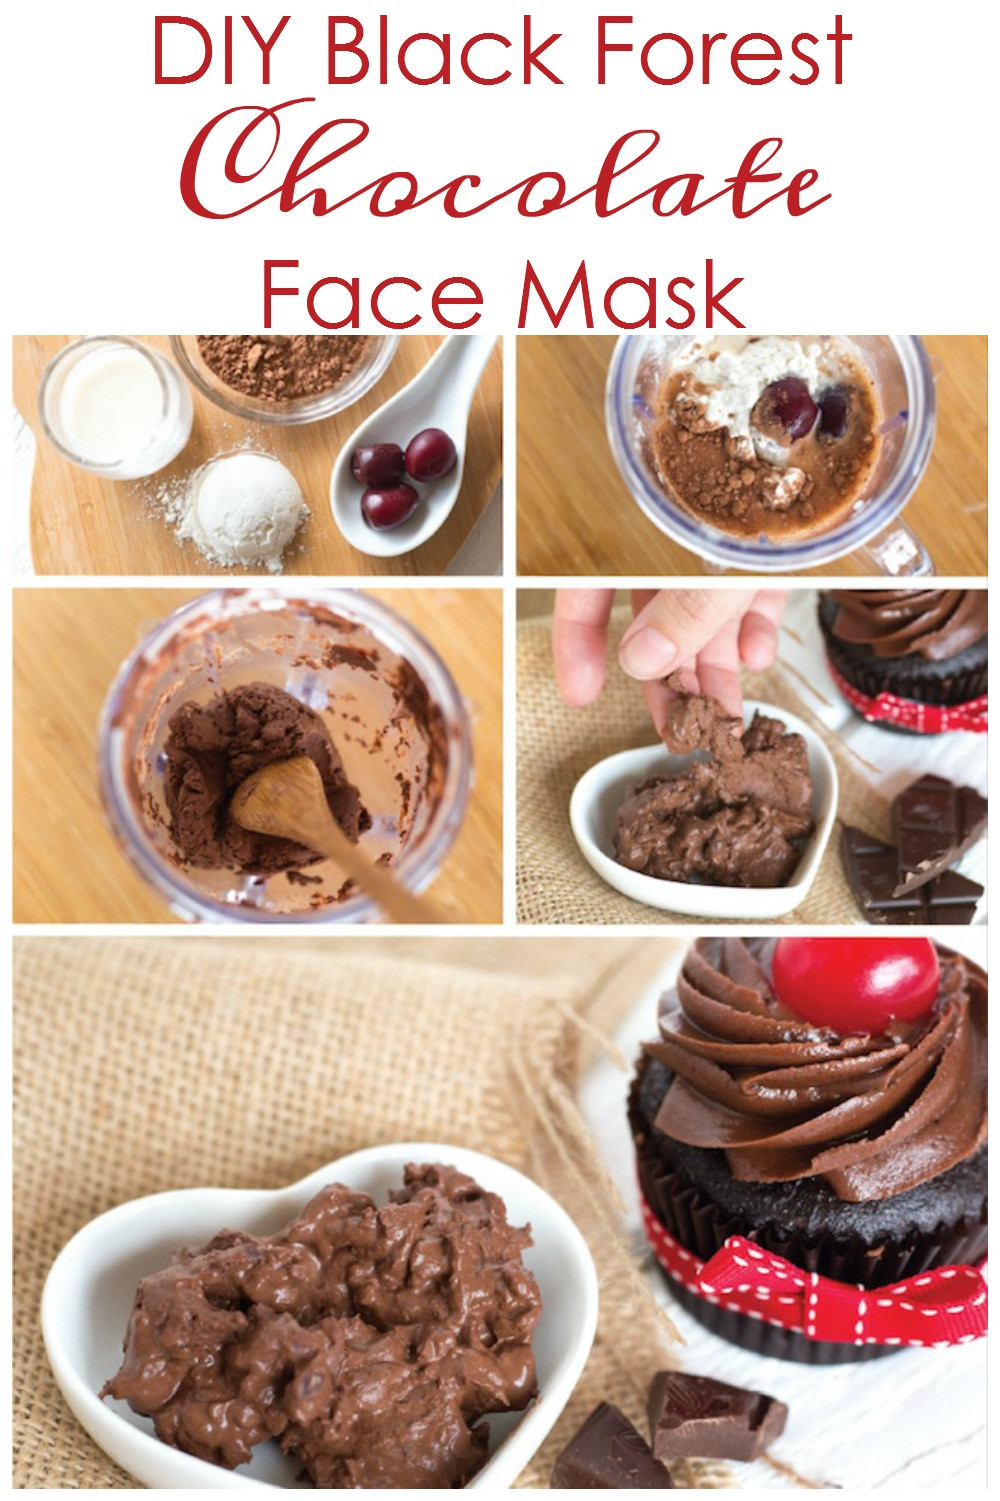 DIY Chocolate Face Mask
 How to Make a DIY Black Forest Chocolate Face Mask Style